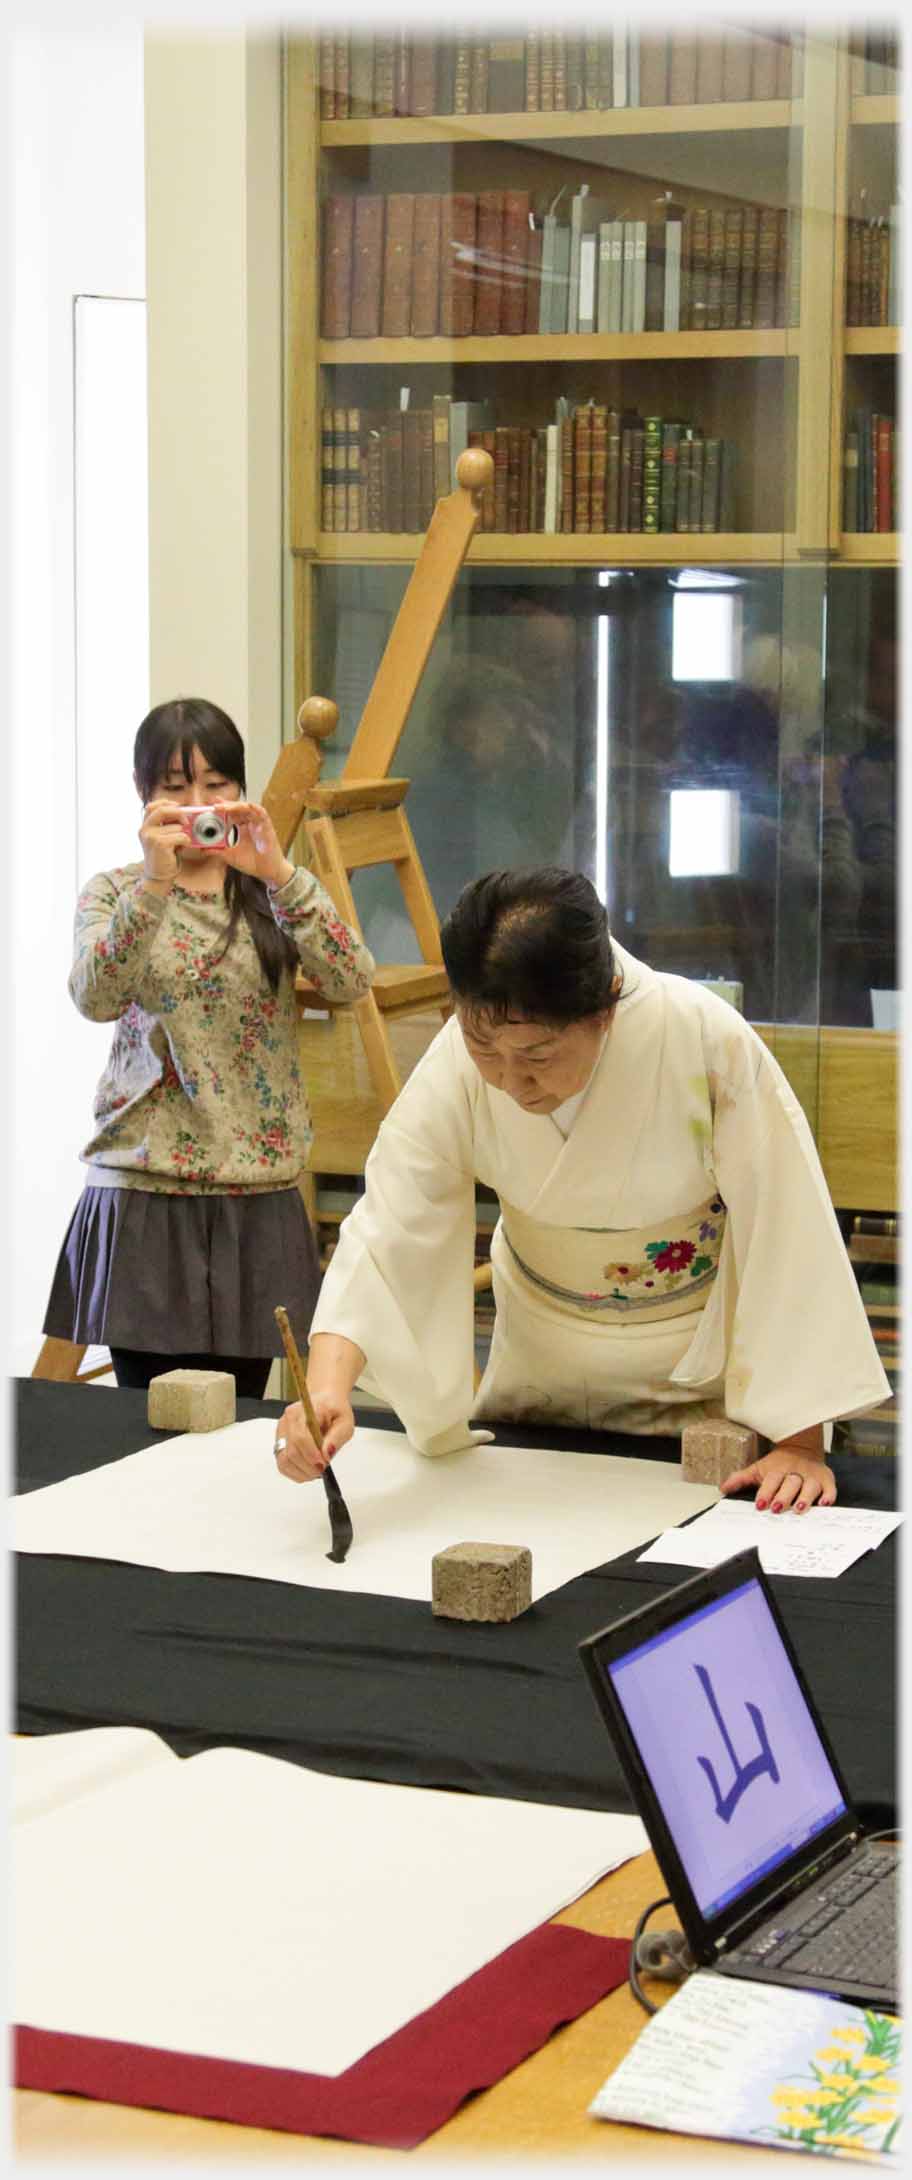 Kimono clad woman with paintbrush starting to write, woman  pbhotographing her.